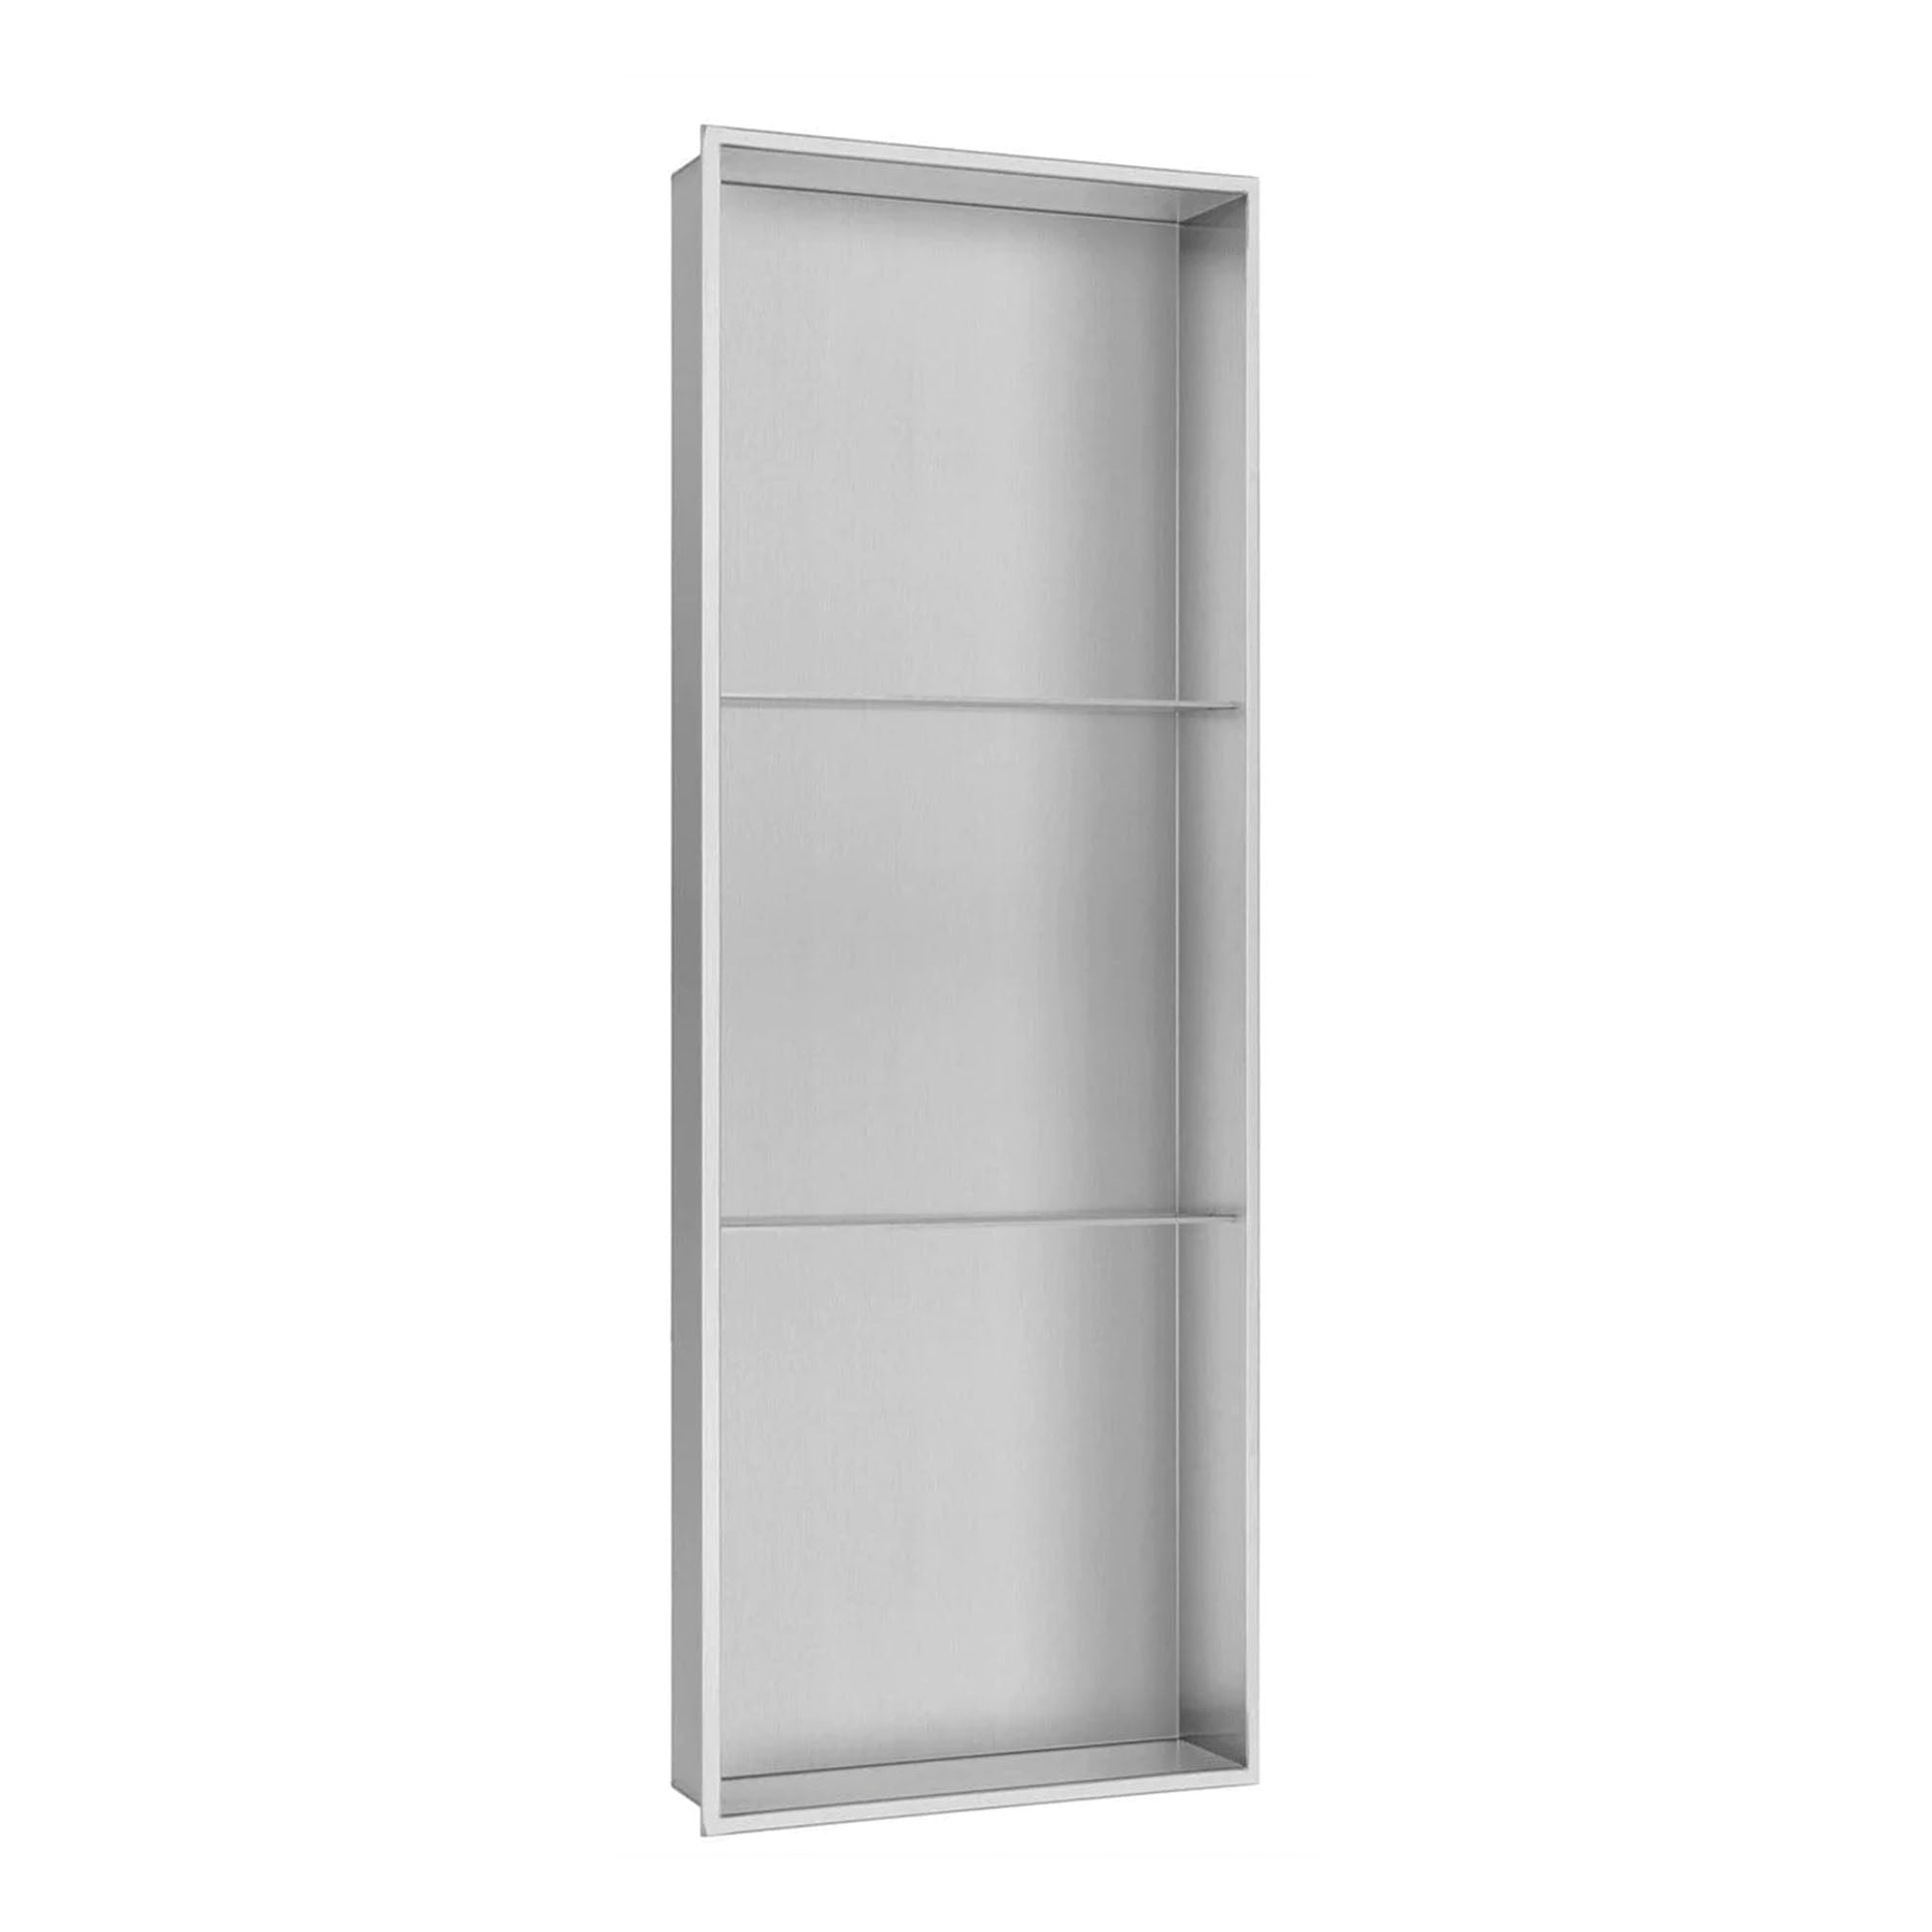 SHOWER WALL NICHE - 12 X 36" STAINLESS (WITH SHELVES)